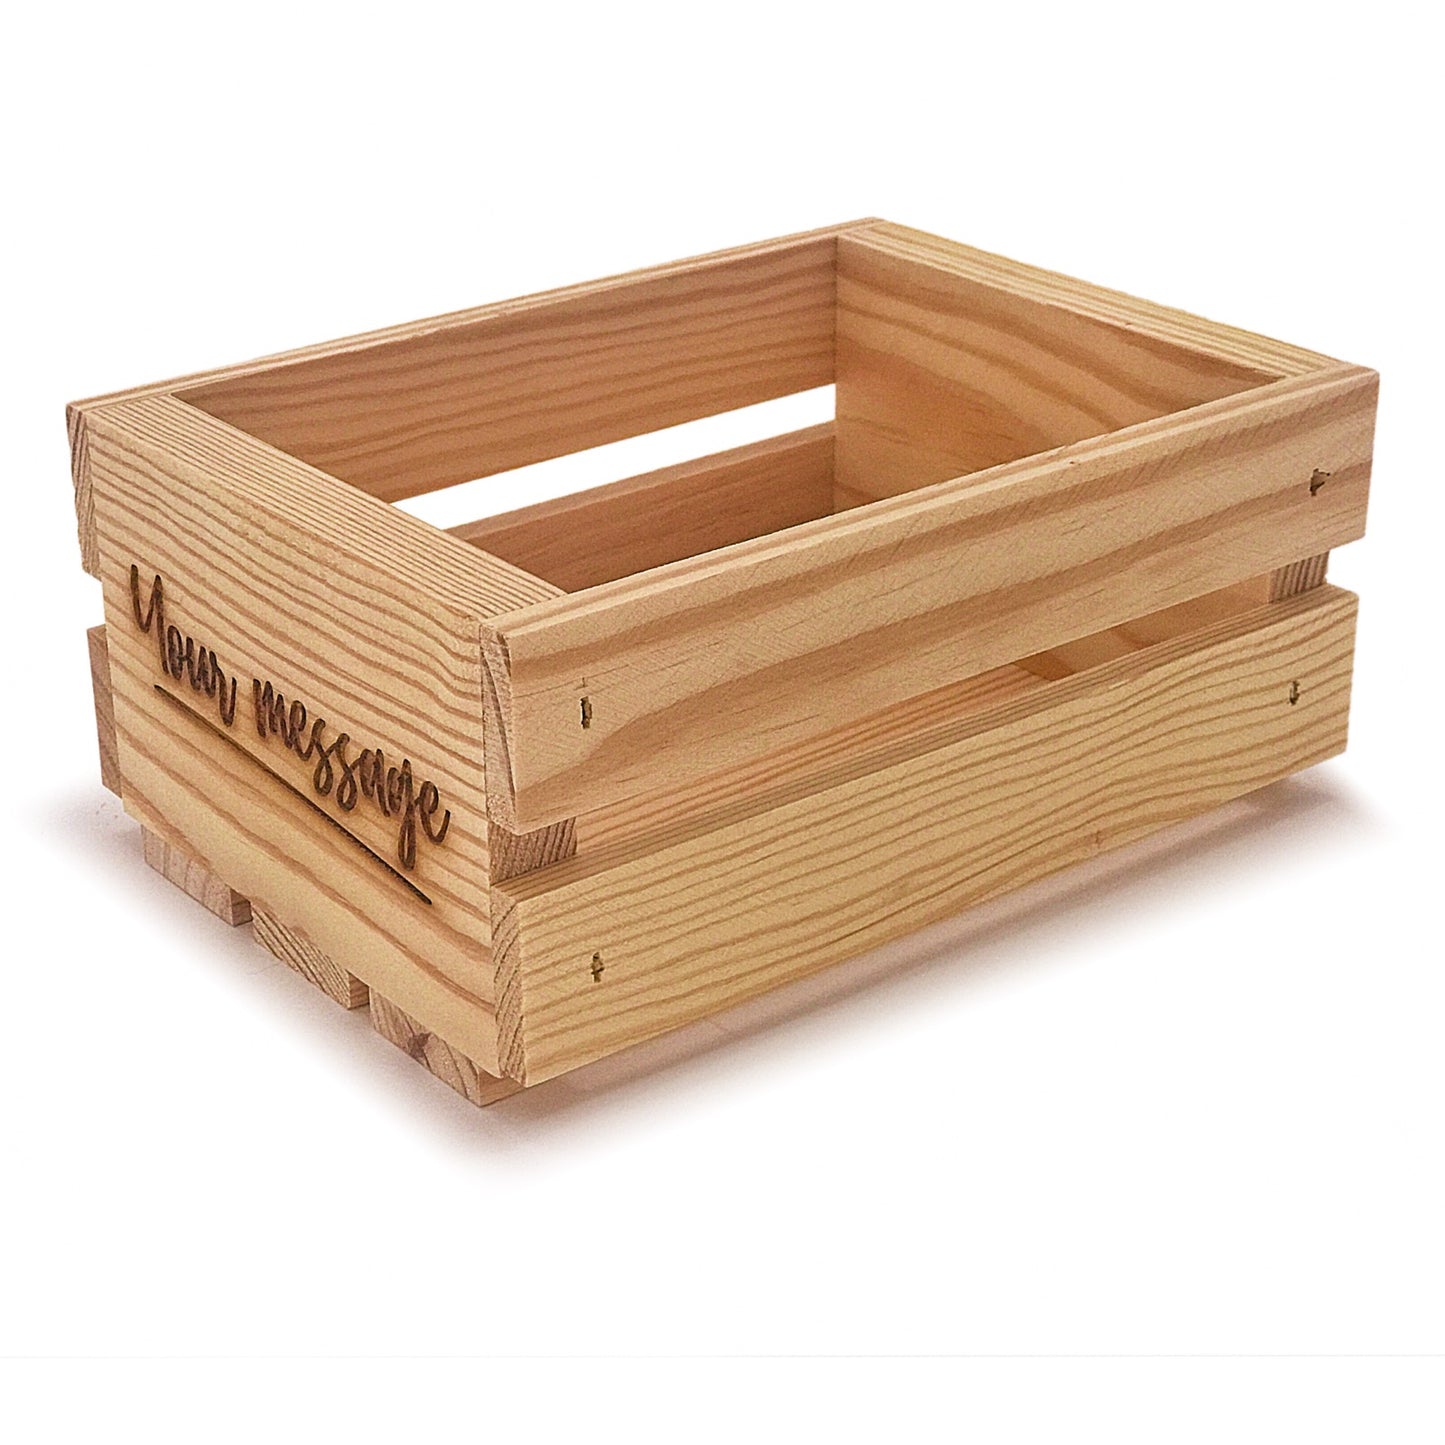 Small wooden crate with custom message 7.125x5.5x3.5, 6-S2-7.125-5.5-3.5-ST-NW-NL, 12-S2-7.125-5.5-3.5-ST-NW-NL, 24-S2-7.125-5.5-3.5-ST-NW-NL, 48-S2-7.125-5.5-3.5-ST-NW-NL, 96-S2-7.125-5.5-3.5-ST-NW-NL,